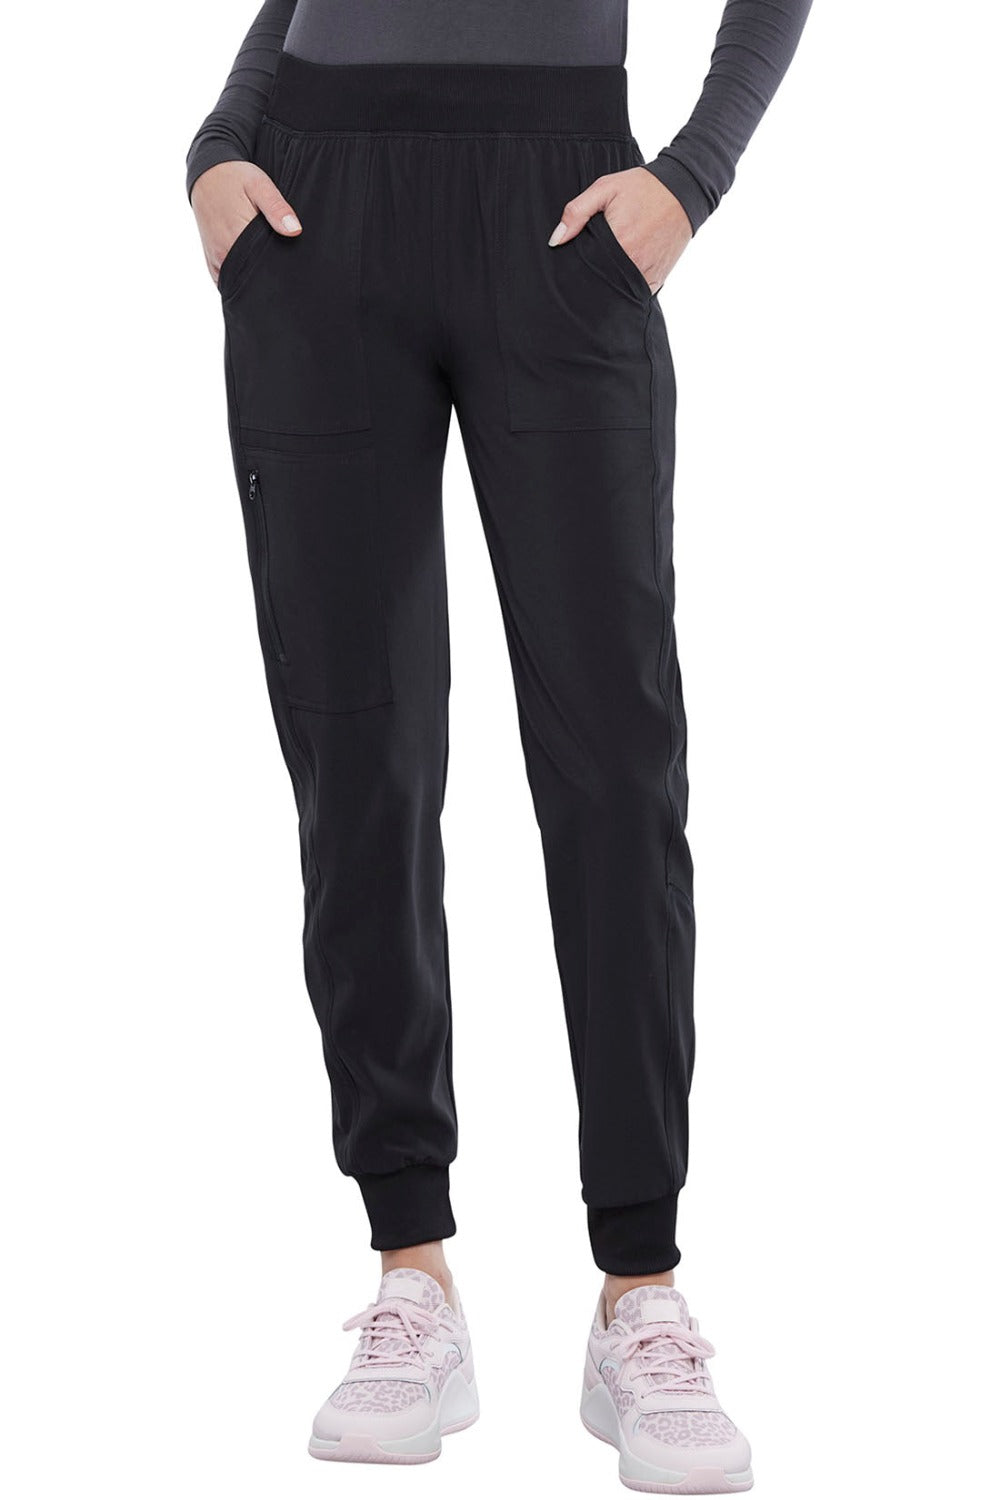 Cherokee Allura Scrub Pant Pull On Jogger in Black at Parker's Clothing and Shoes.